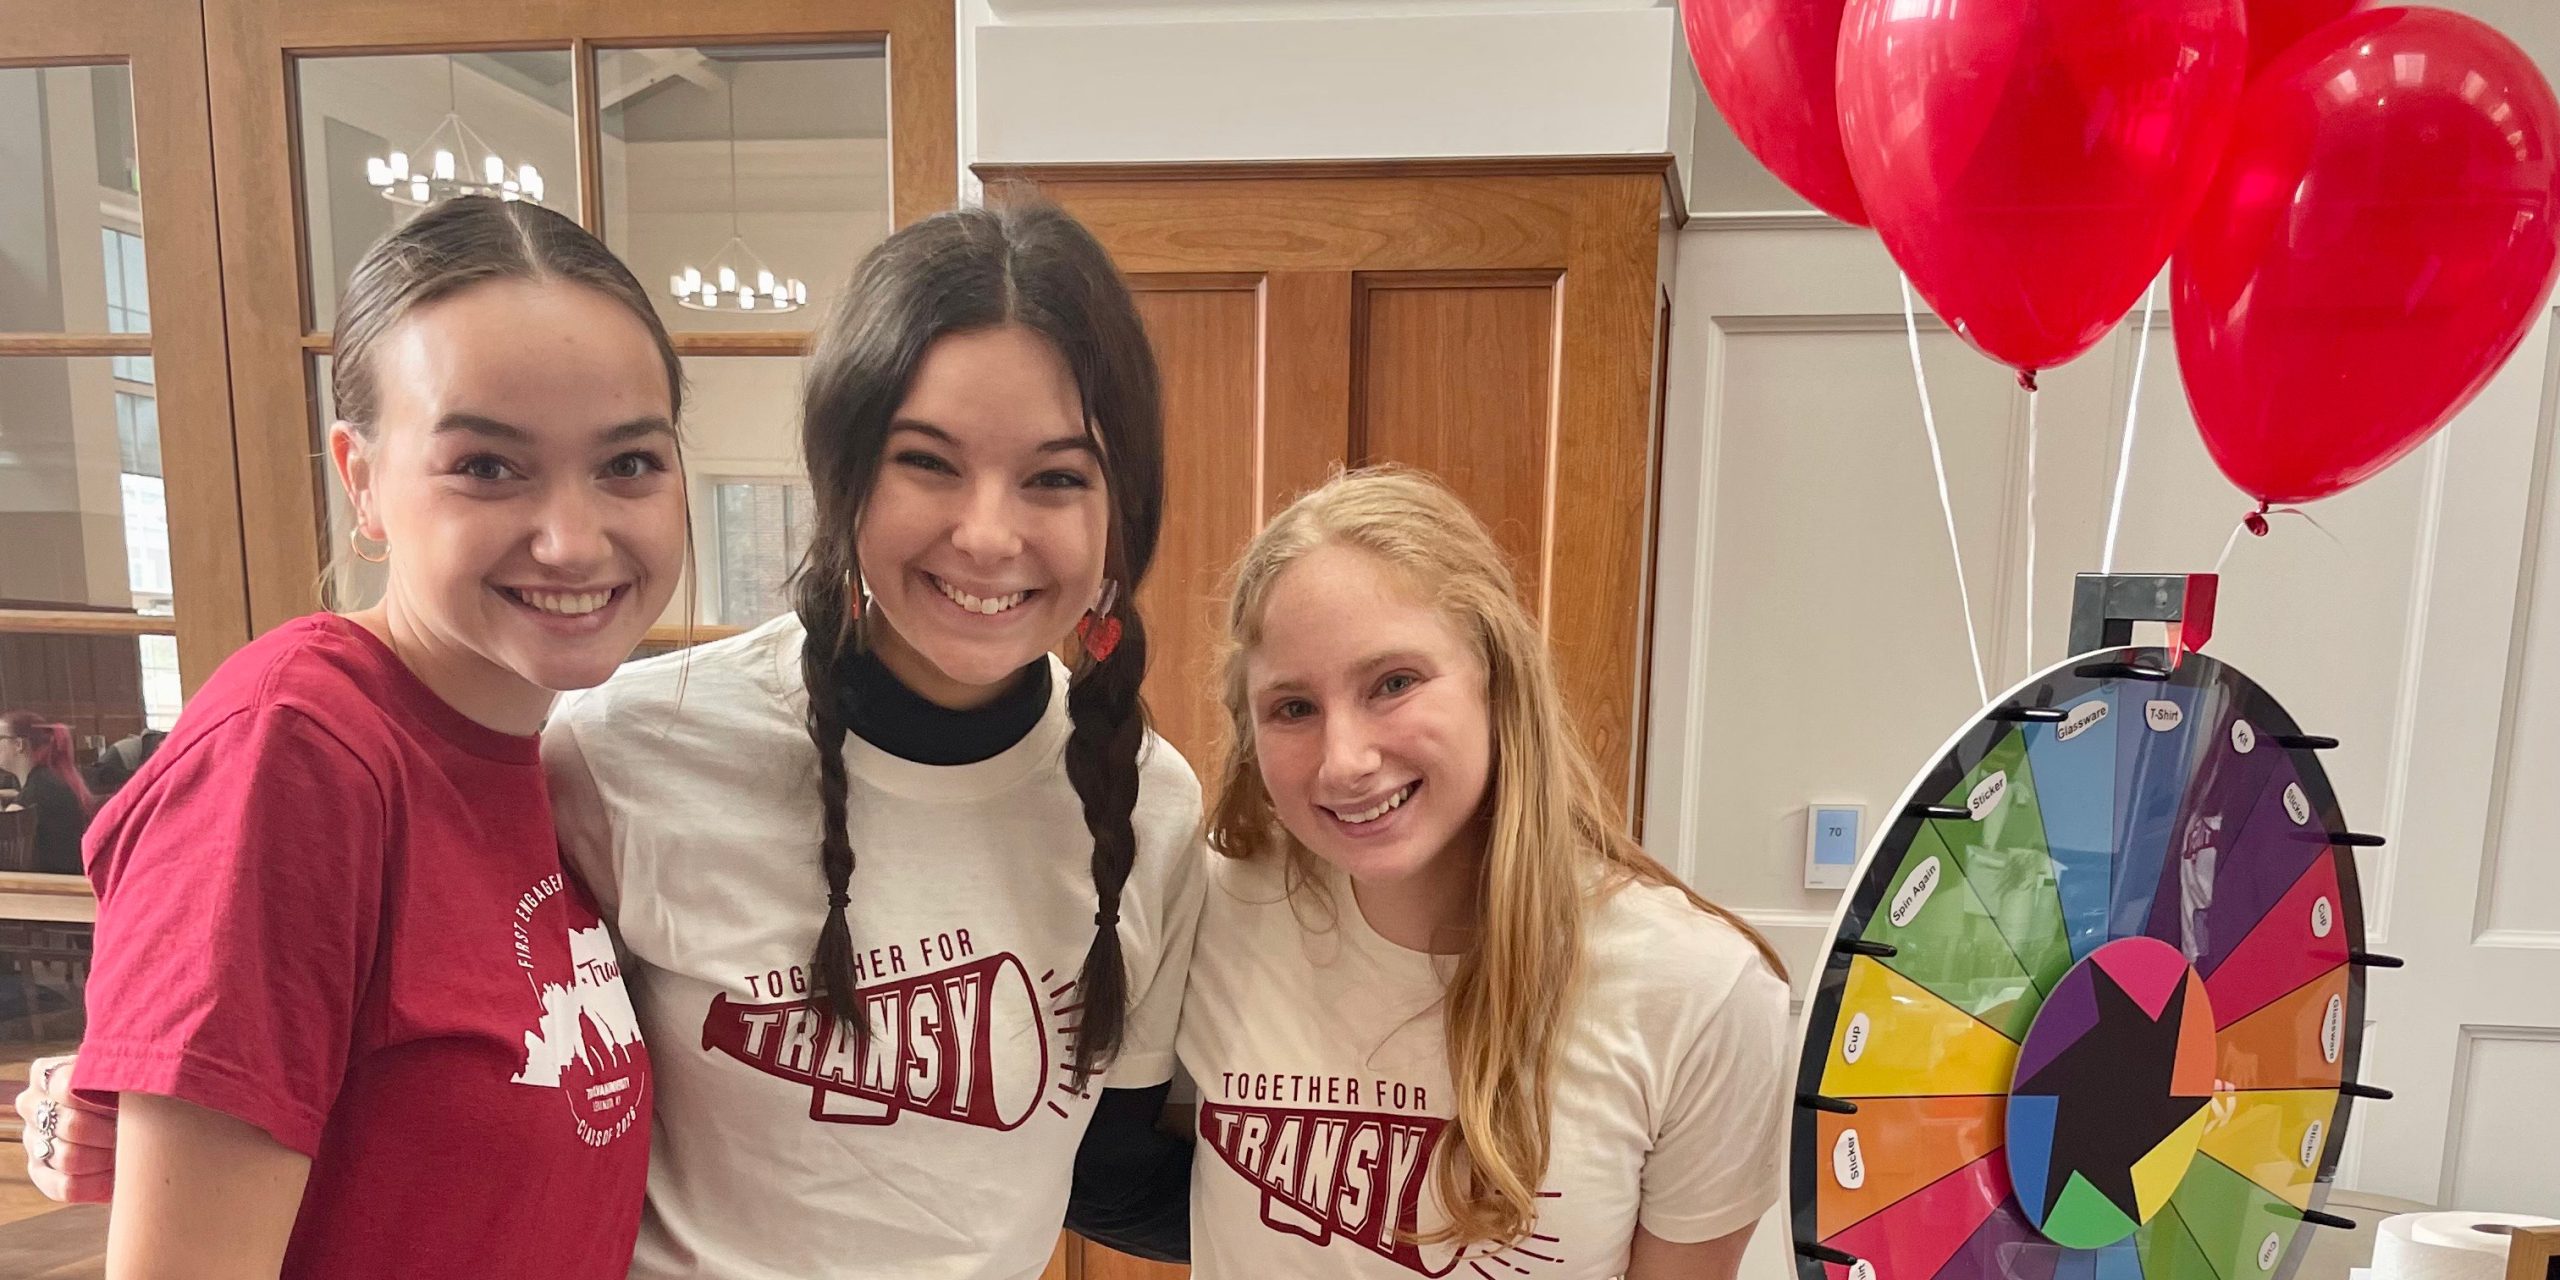 Together for Transy 2023